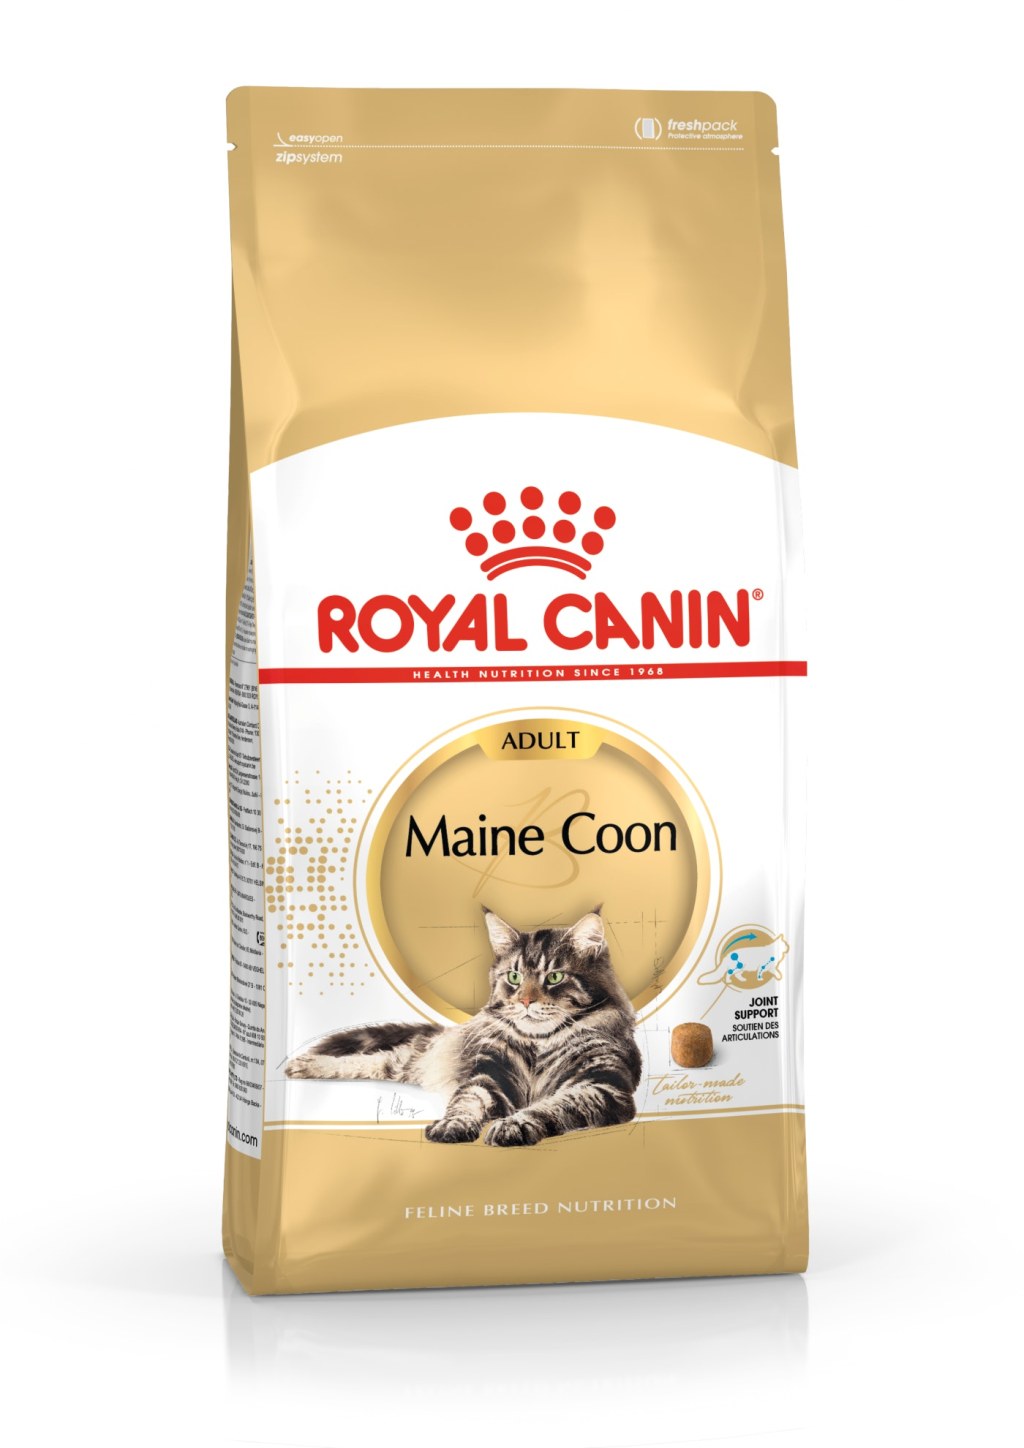 Picture of: Maine Coon Adult dry  Royal Canin